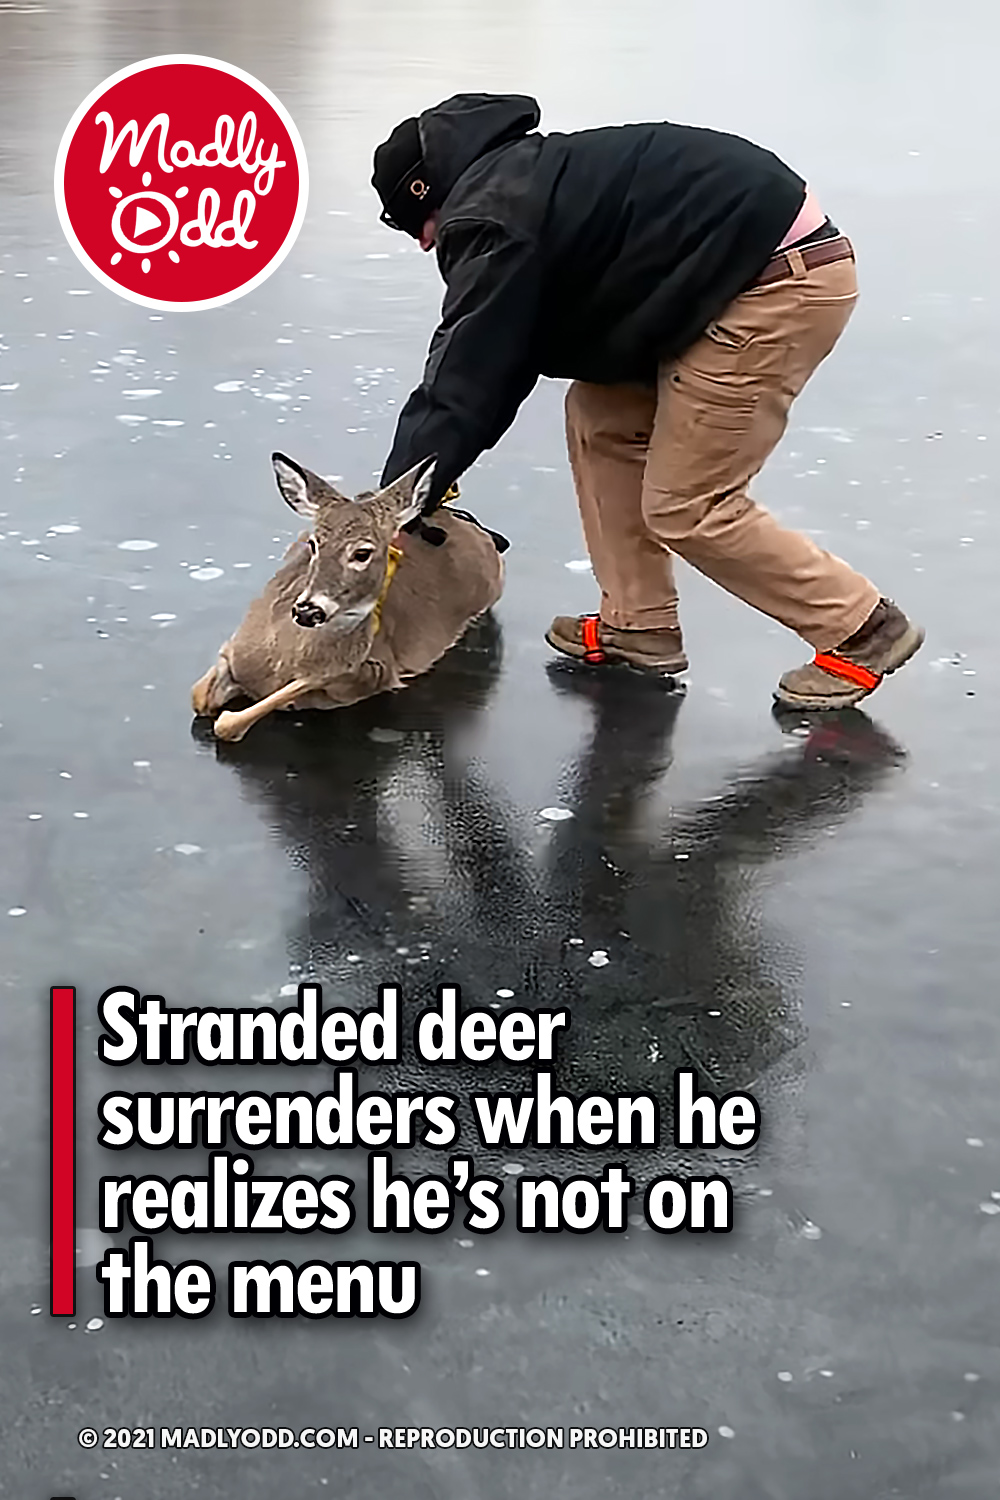 Stranded deer surrenders when he realizes he’s not on the menu